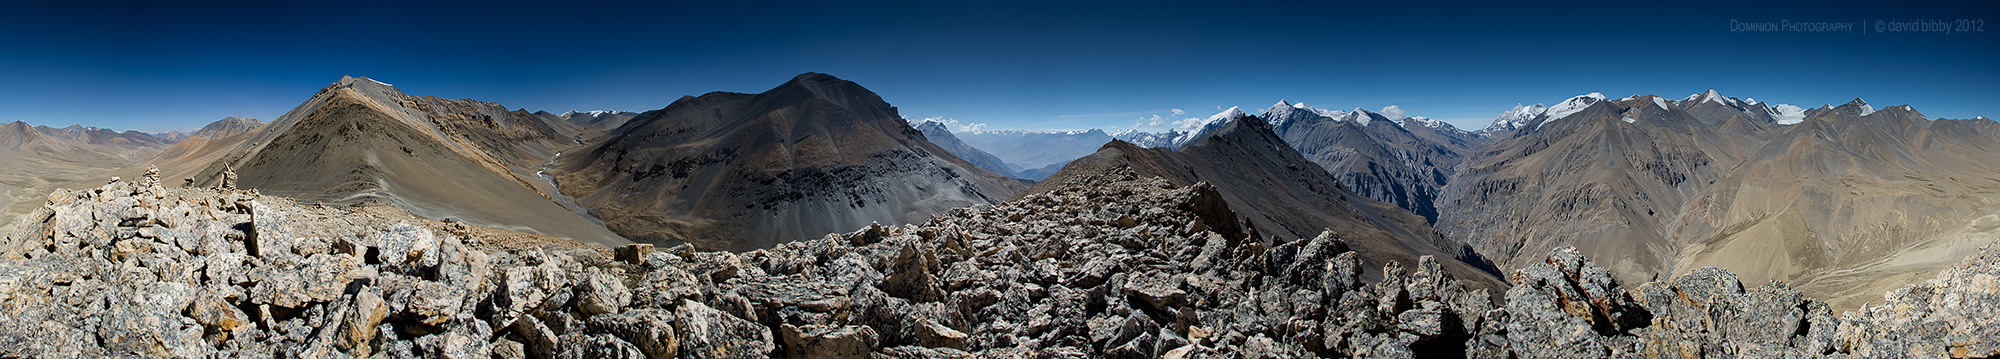  A 360 degree view from a small peak (about 5600m) above the Jungben La (5550m). Dhaulagiri Himal in the distance at right. Mustang / Dolpa districts. 